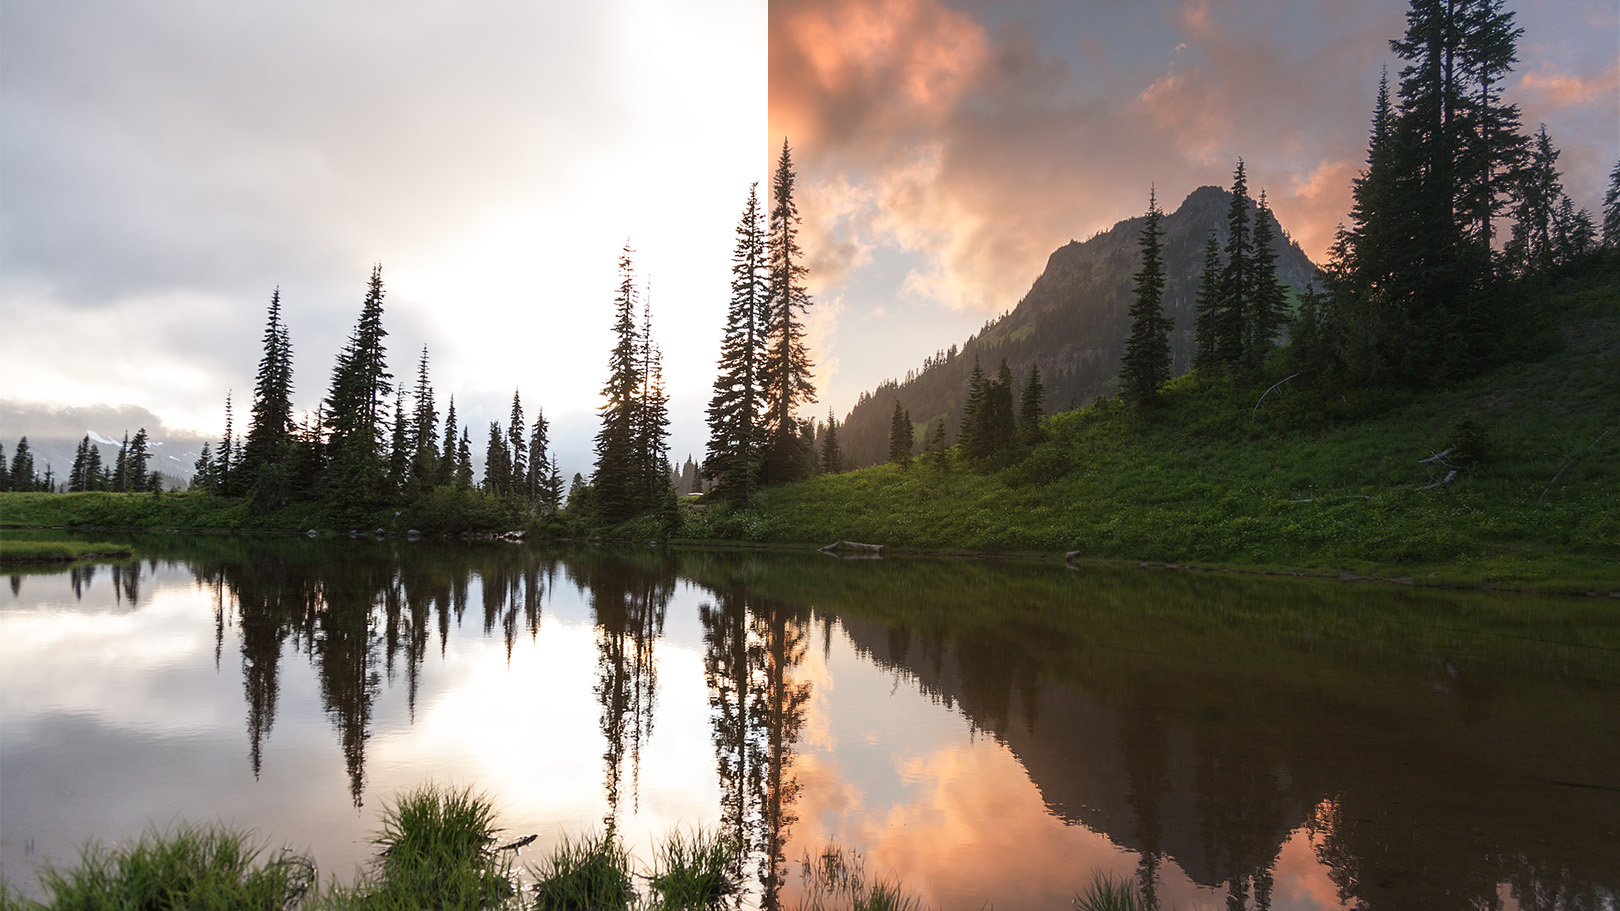 How To Cleanly Blend 3 Exposures in Photoshop